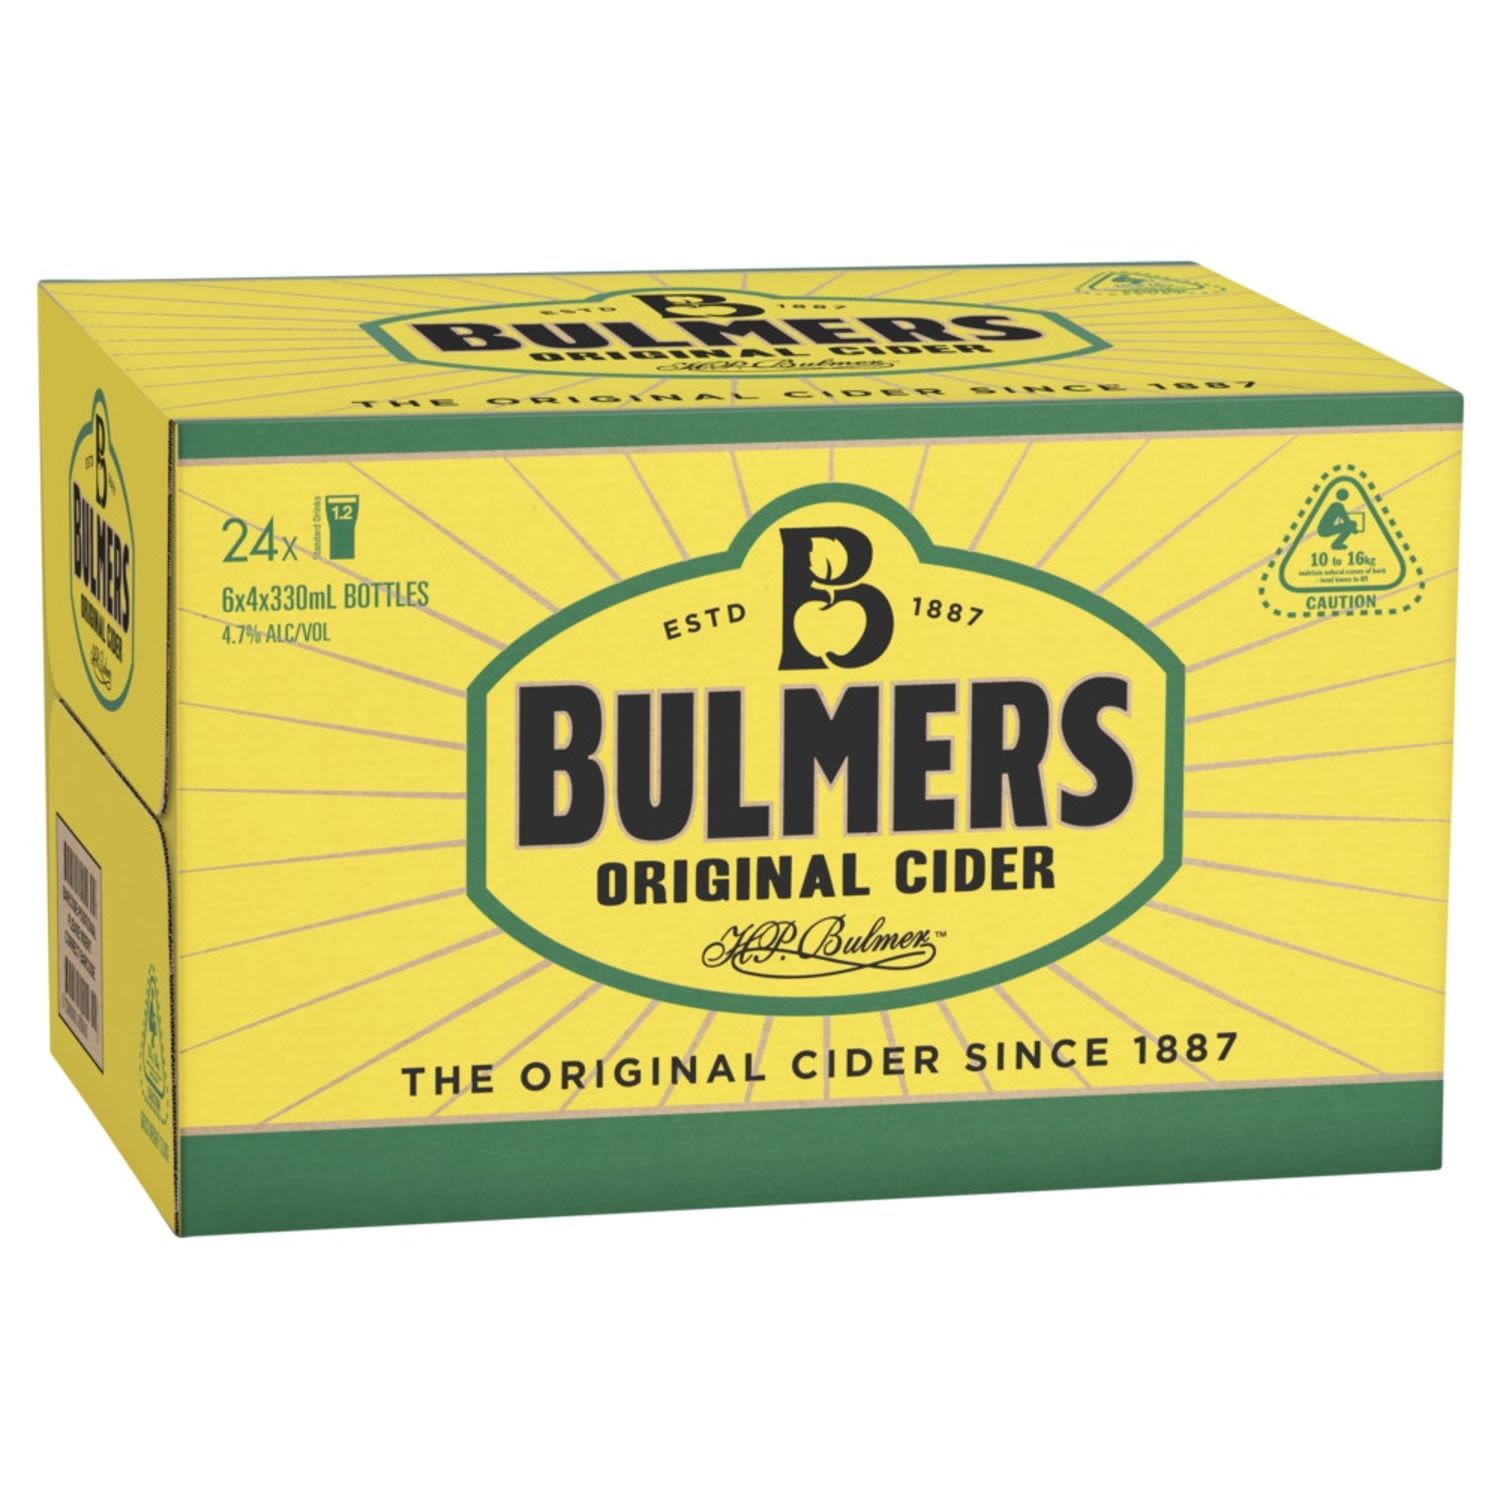 Bulmers Original Cider is quickly becoming a staple in most good pubs around the country. Bulmers is an authentic English-style apple Cider with a naturally refreshing taste and crisp character. A premium Cider for all occasions.<br /> <br />Alcohol Volume: 4.70%<br /><br />Pack Format: 24 Pack<br /><br />Standard Drinks: 1.2</br /><br />Pack Type: Bottle<br /><br />Country of Origin: Australia<br />